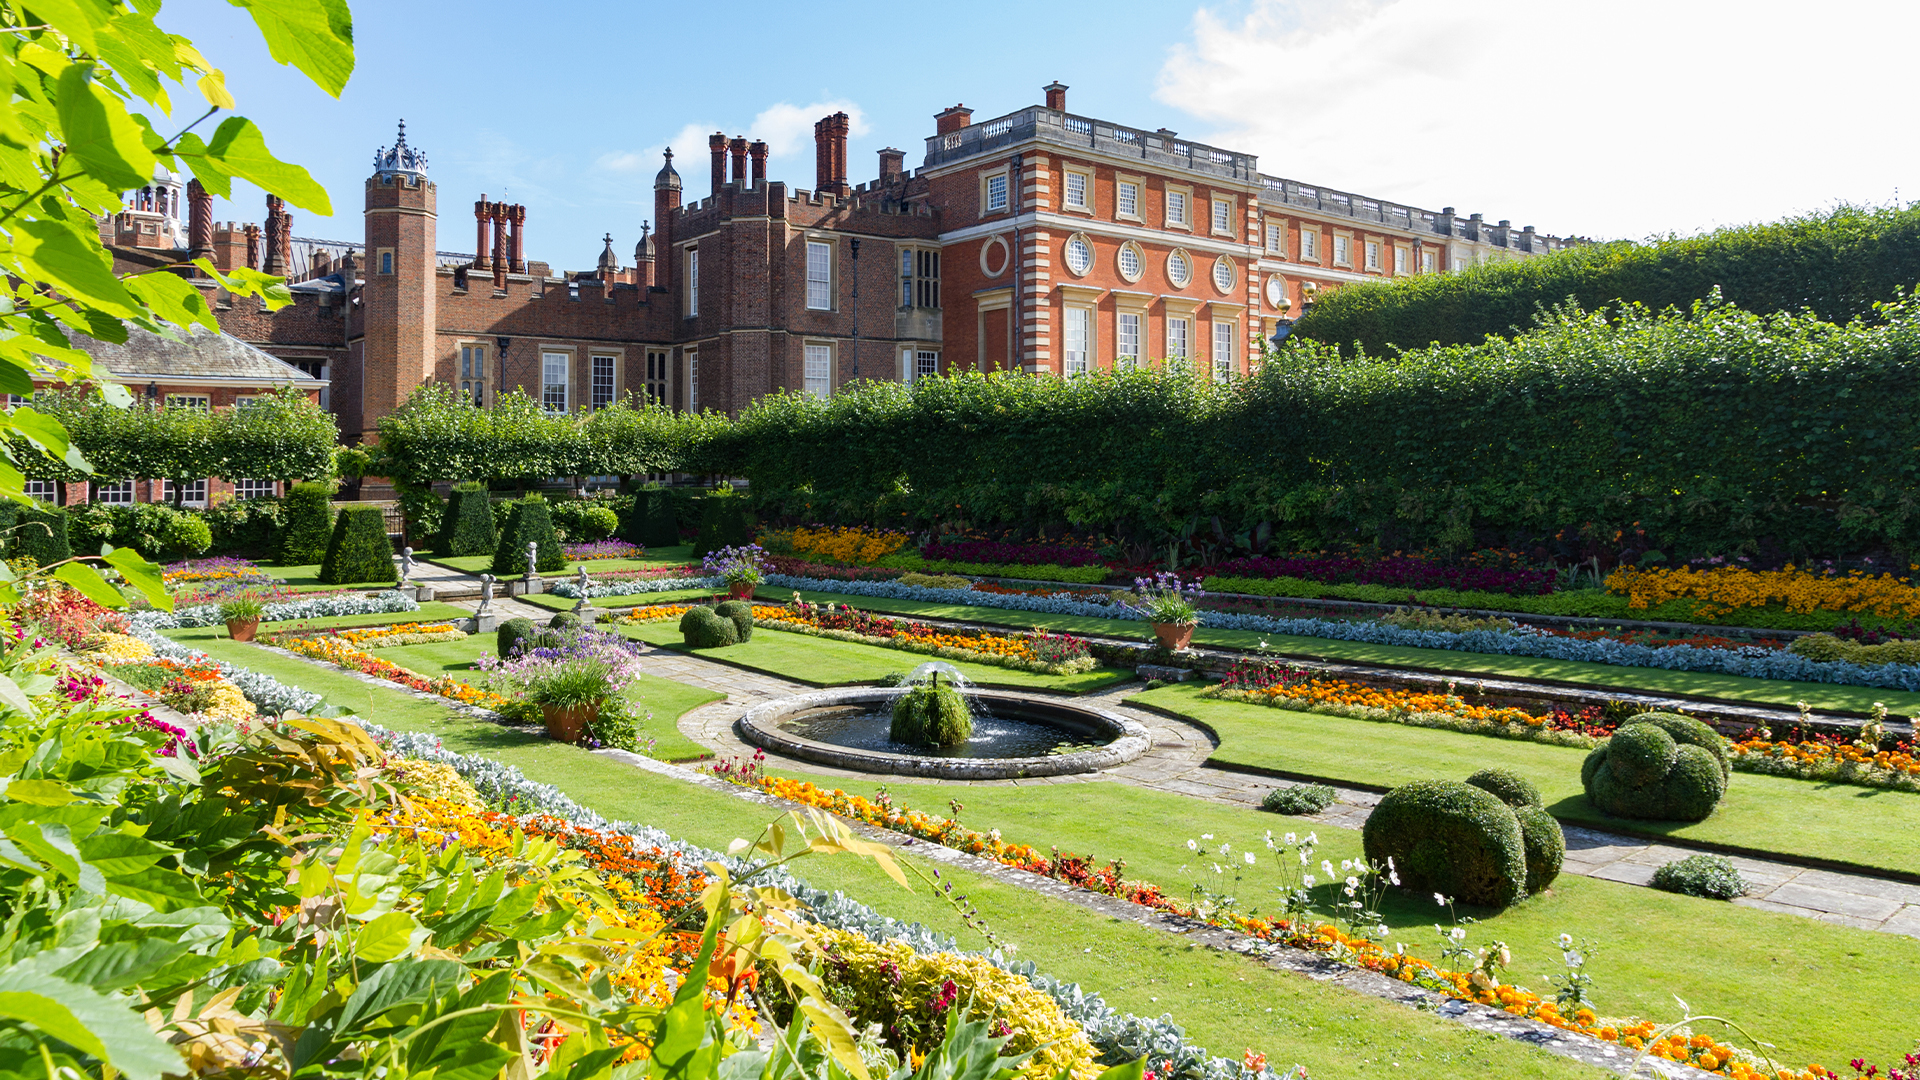 Georgian and Tudor Facades of Hampton Court Palace with the foreground showing the colorful sunken gardens